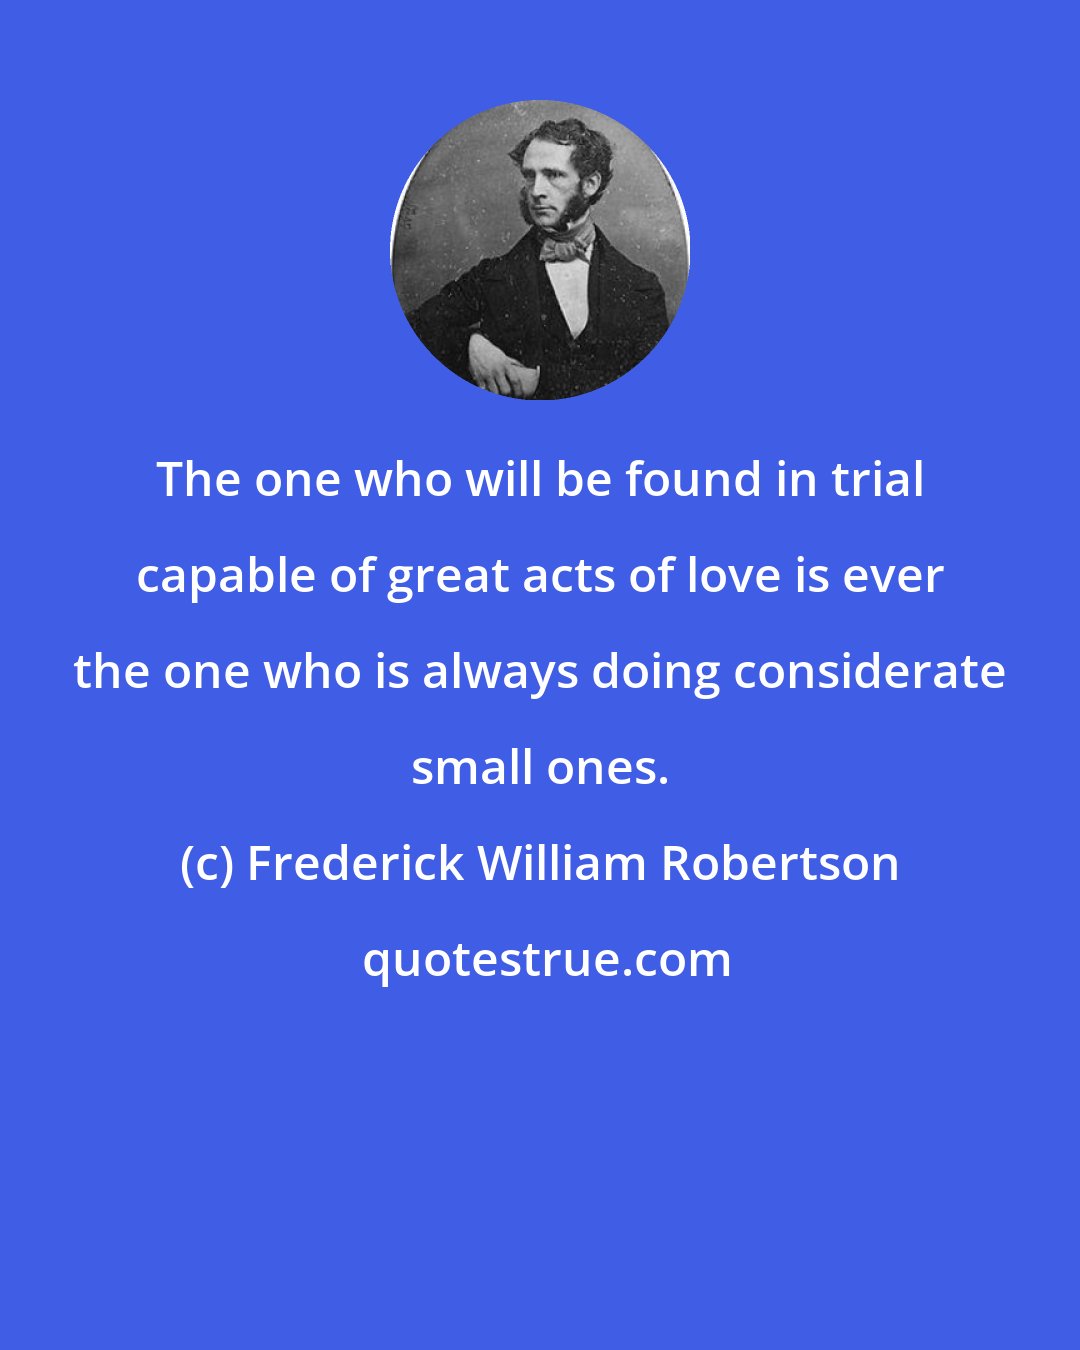 Frederick William Robertson: The one who will be found in trial capable of great acts of love is ever the one who is always doing considerate small ones.